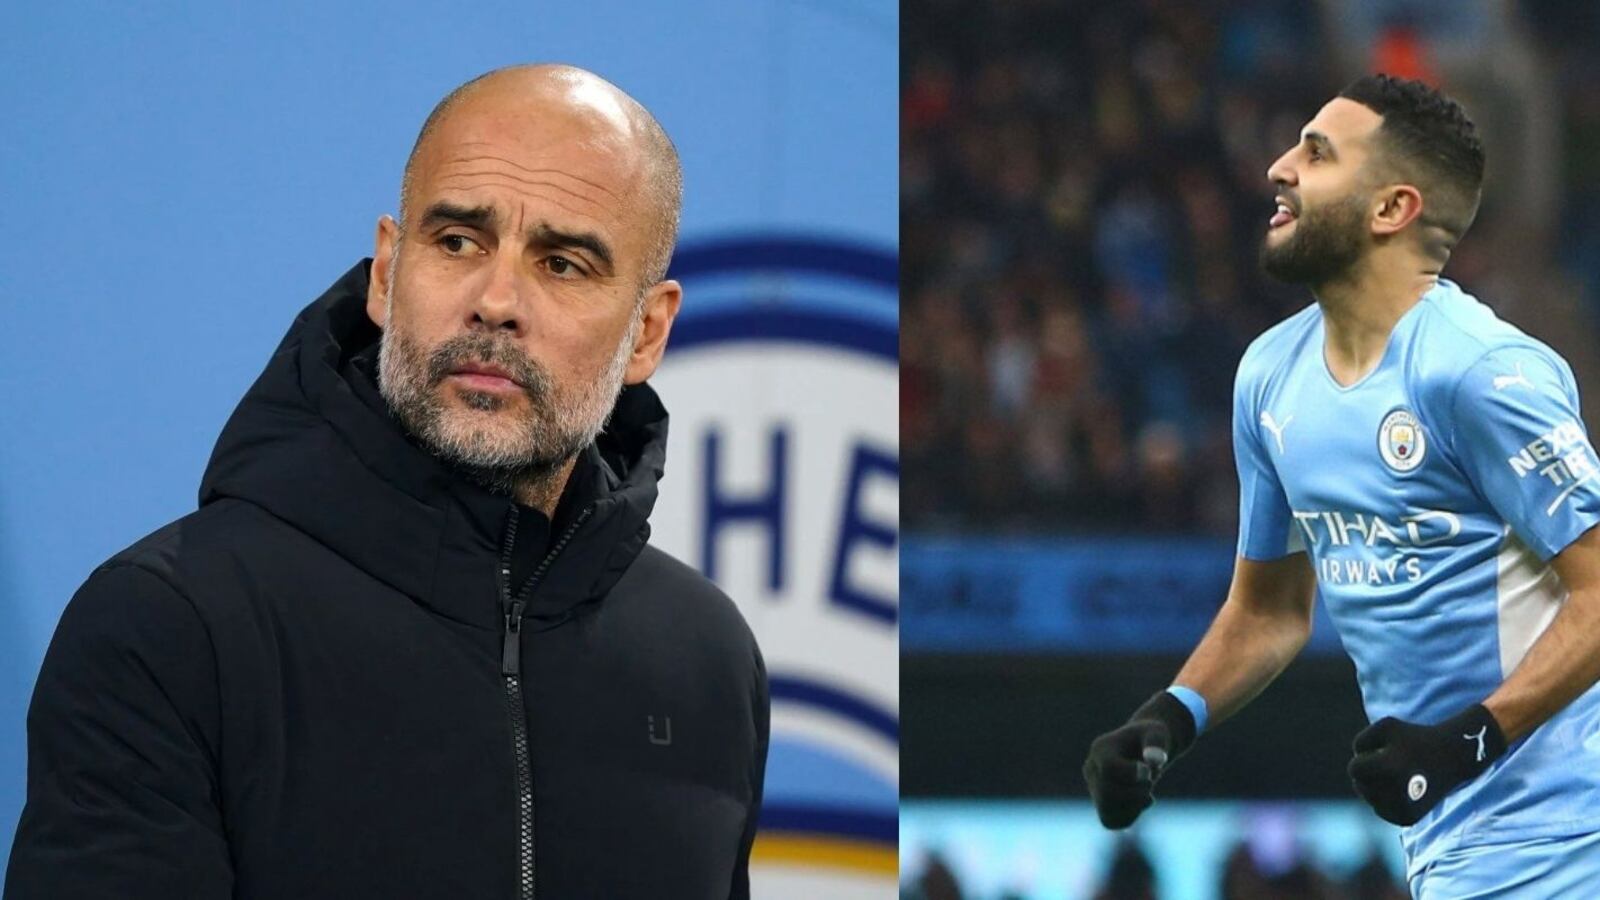 Welcome to Manchester City, Pep Guardiola found Mahrez's replacement